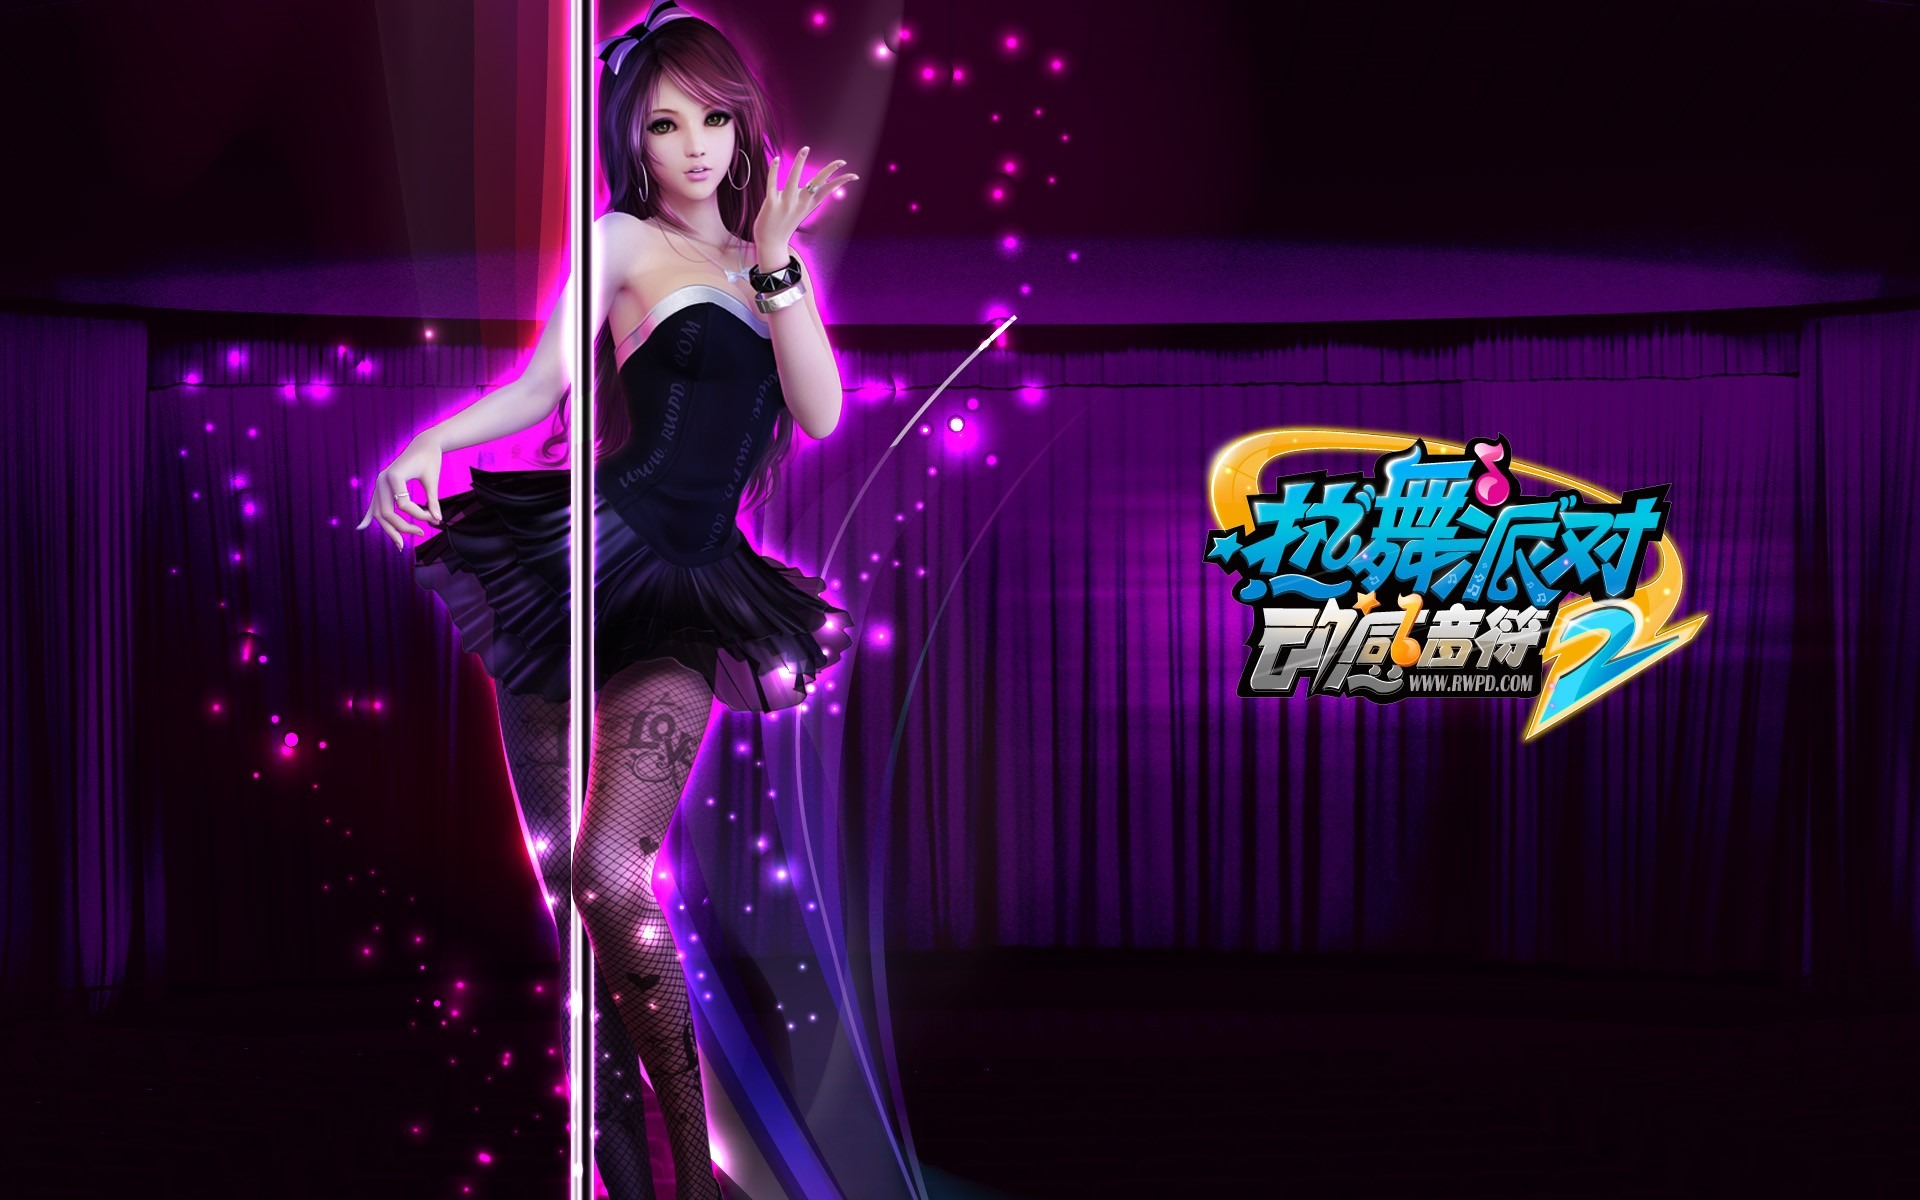 Online game Hot Dance Party II official wallpapers #30 - 1920x1200